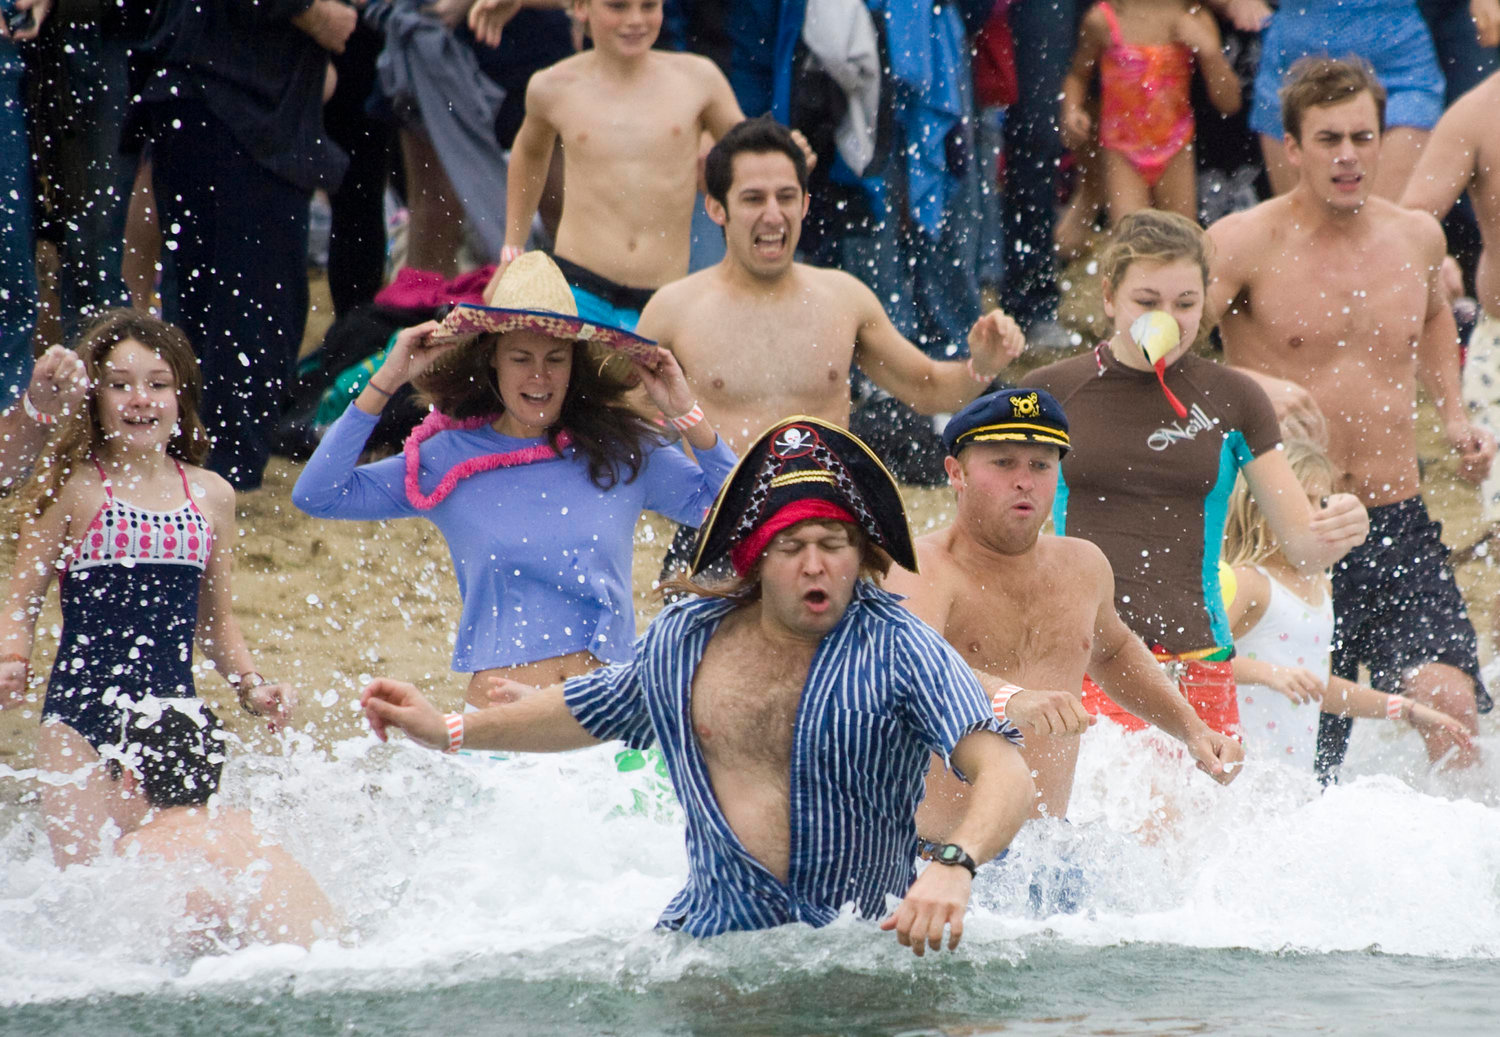 The Cold Turkey Plunge, a benefit for The Atheneum's children programs, at Children's Beach Thursday Nov. 26, 2009. Allen Breed enters the water in his pirate garb.